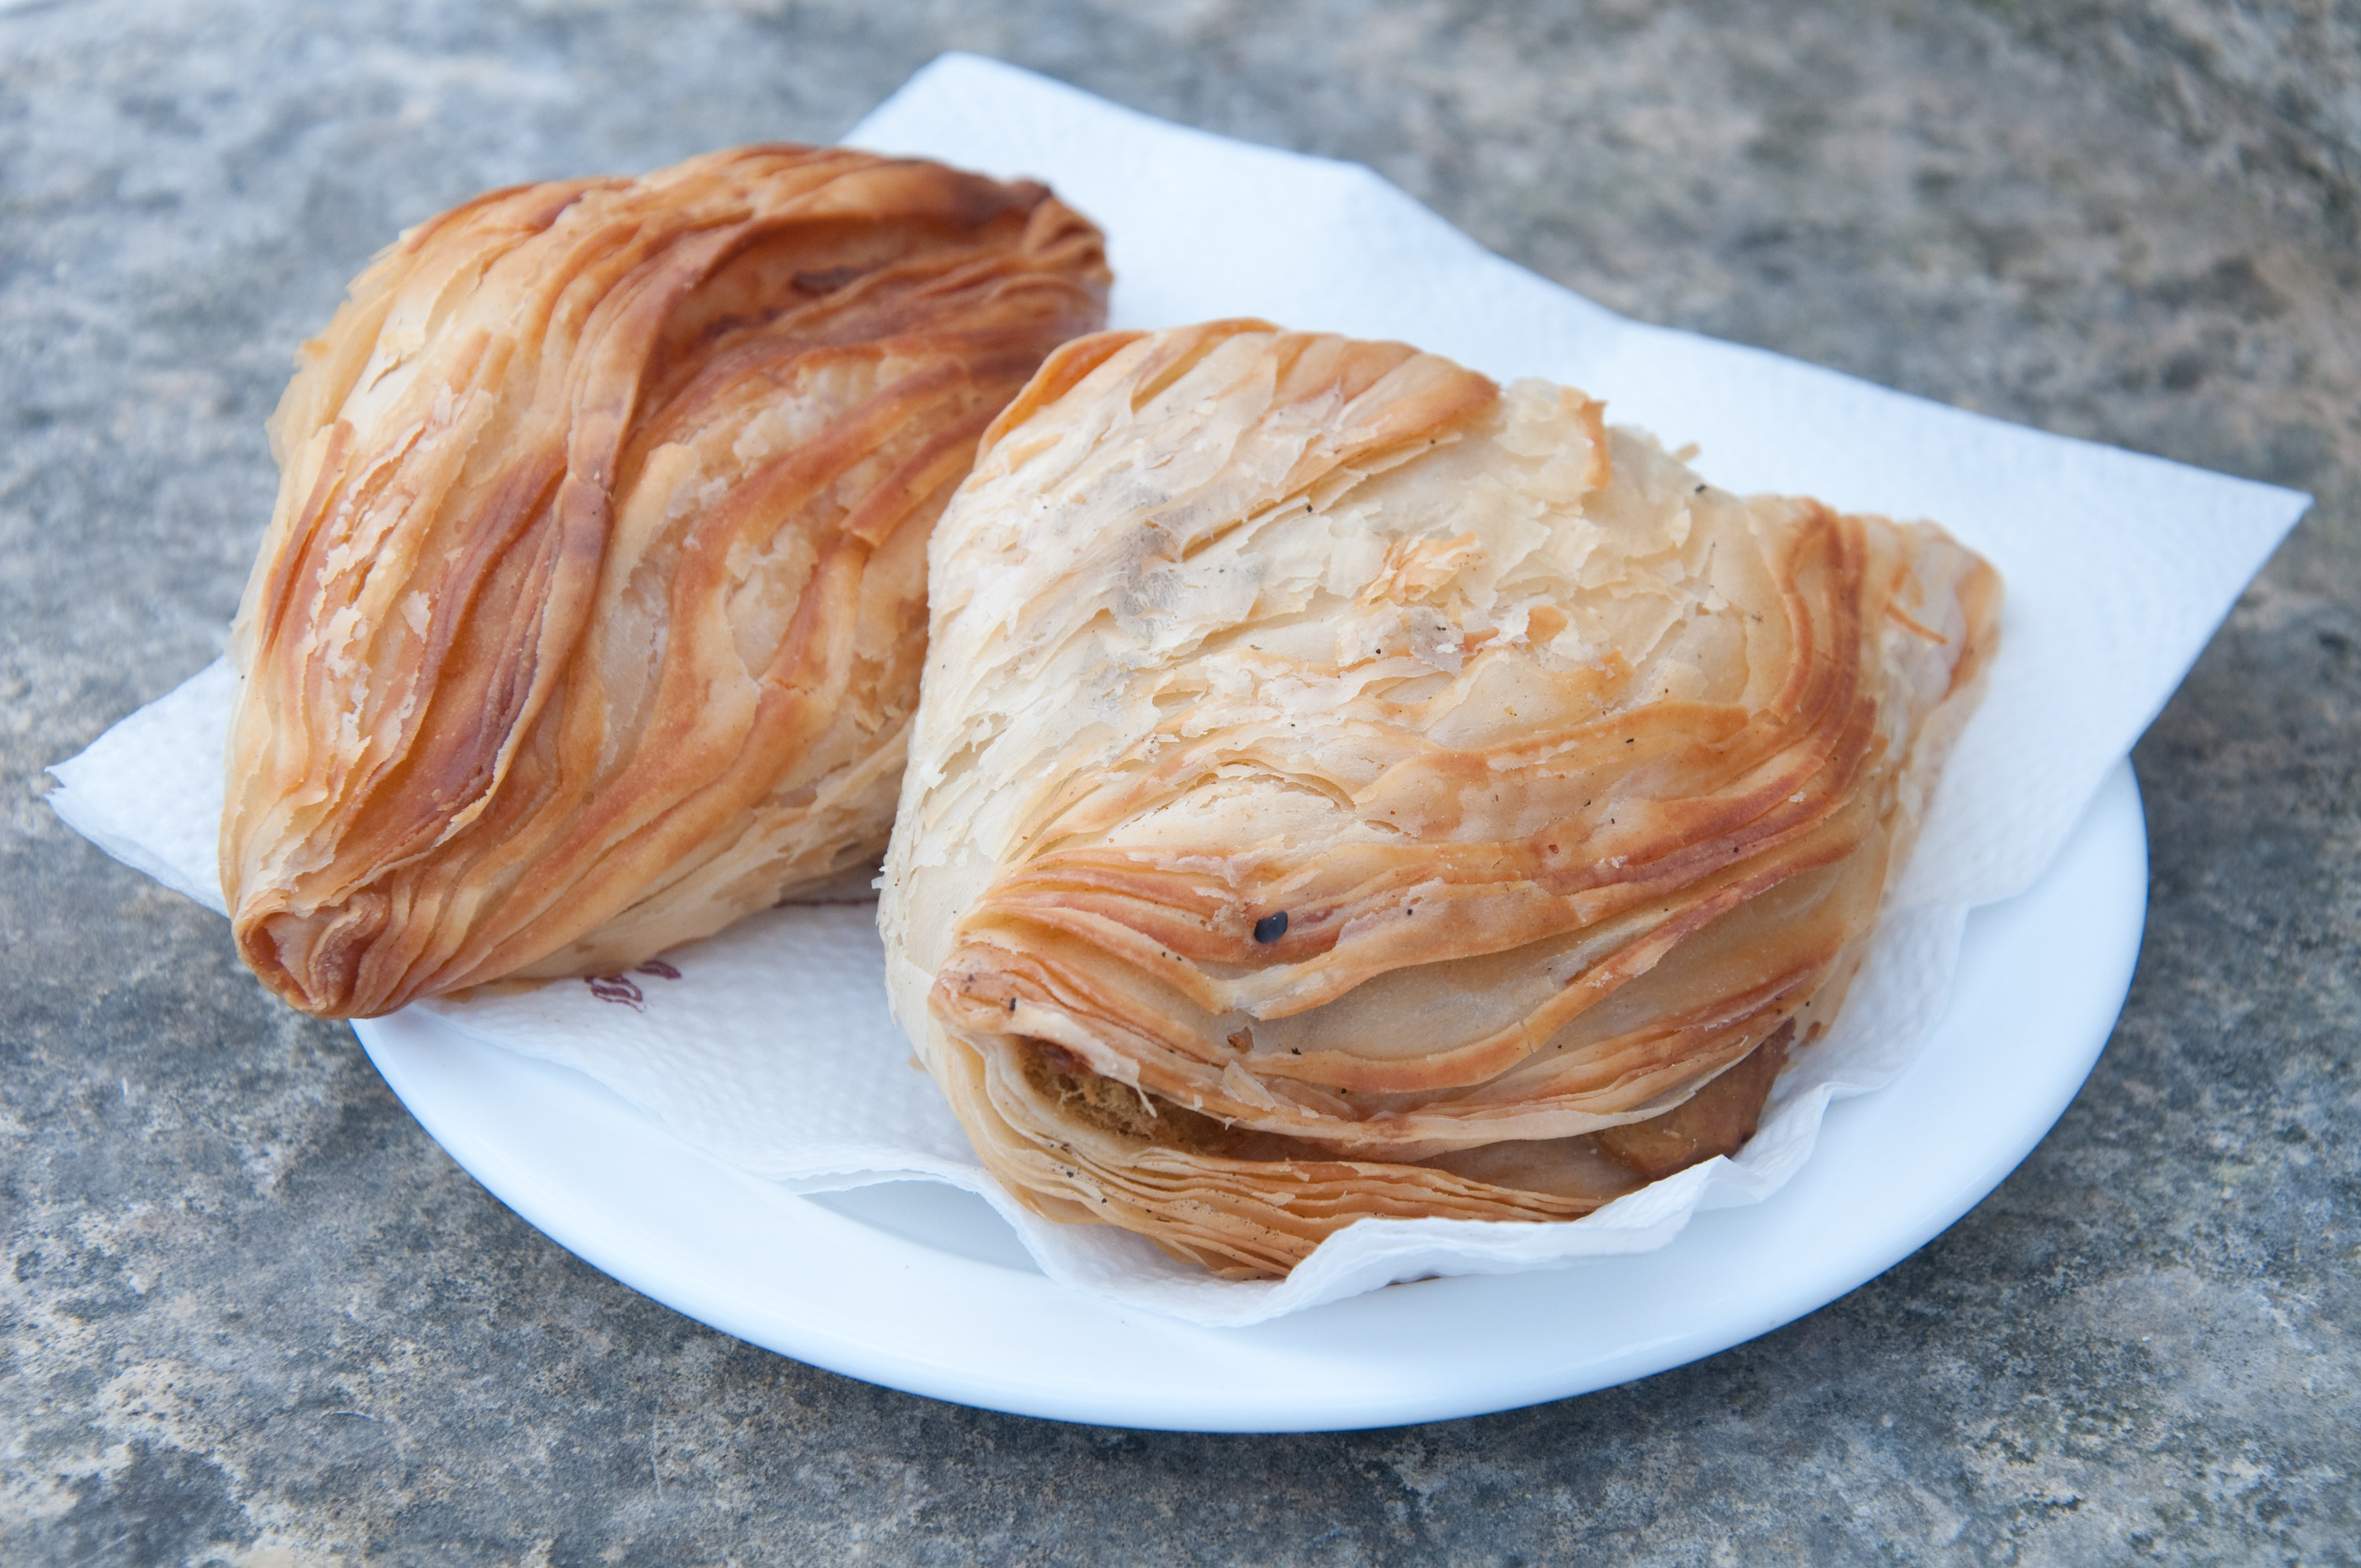 Two pastizzi from street vendors